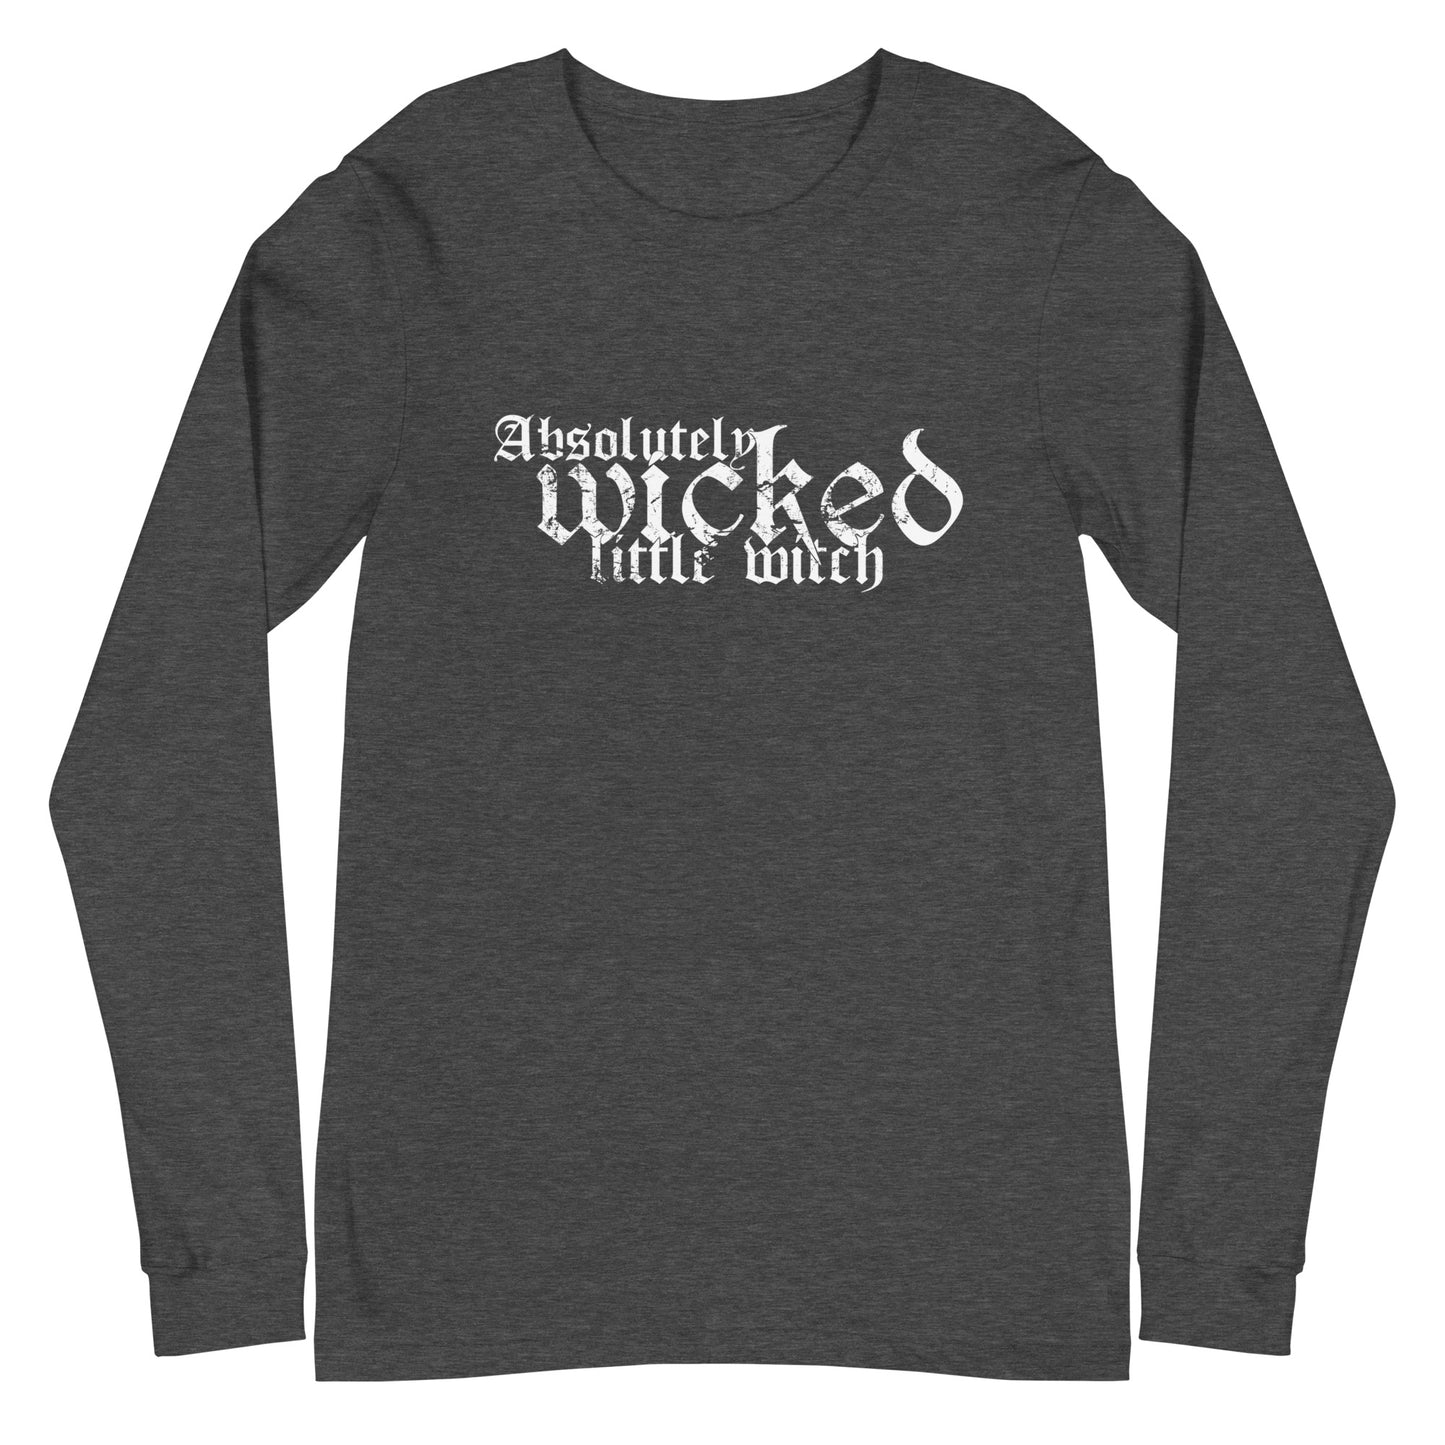 Absolutely Wicked Little Witch - Long Sleeve Tee - Licensed